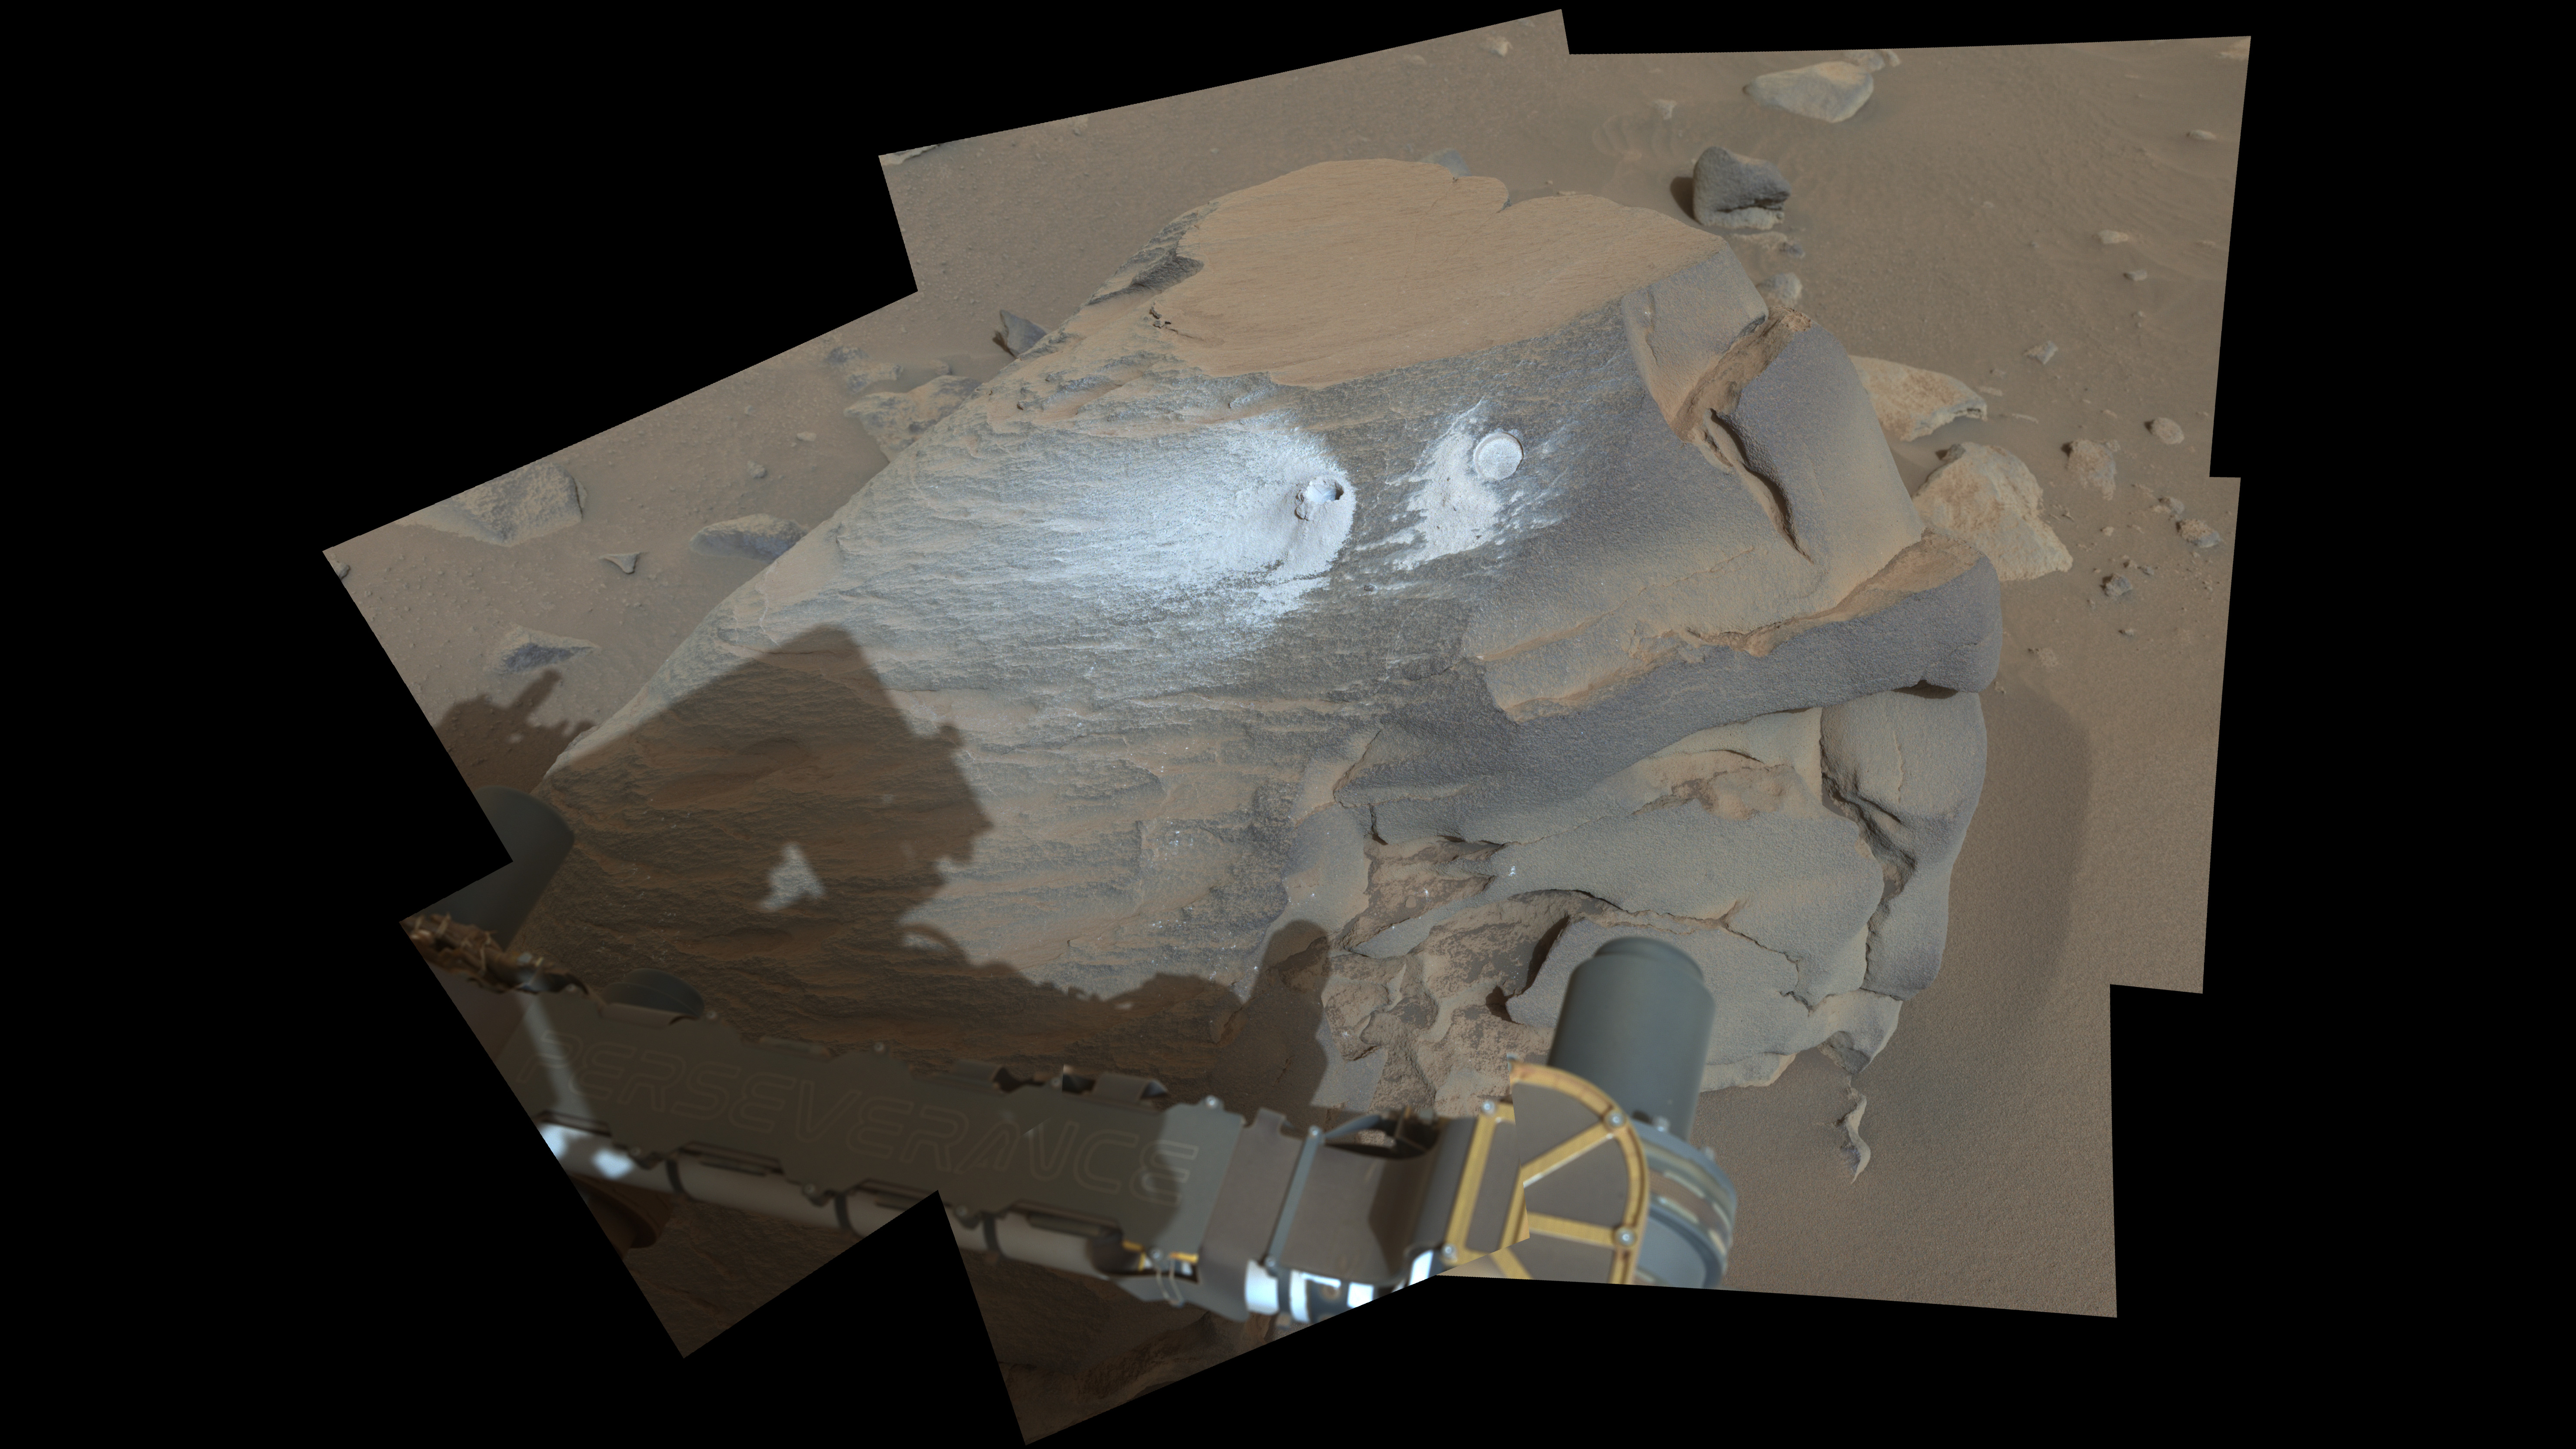 This view shows a rock nicknamed “Bunsen Peak” where NASA’s Perseverance Mars rover extracted its 21st rock core (left) and abraded a circular patch (right) to investigate the rock’s composition.